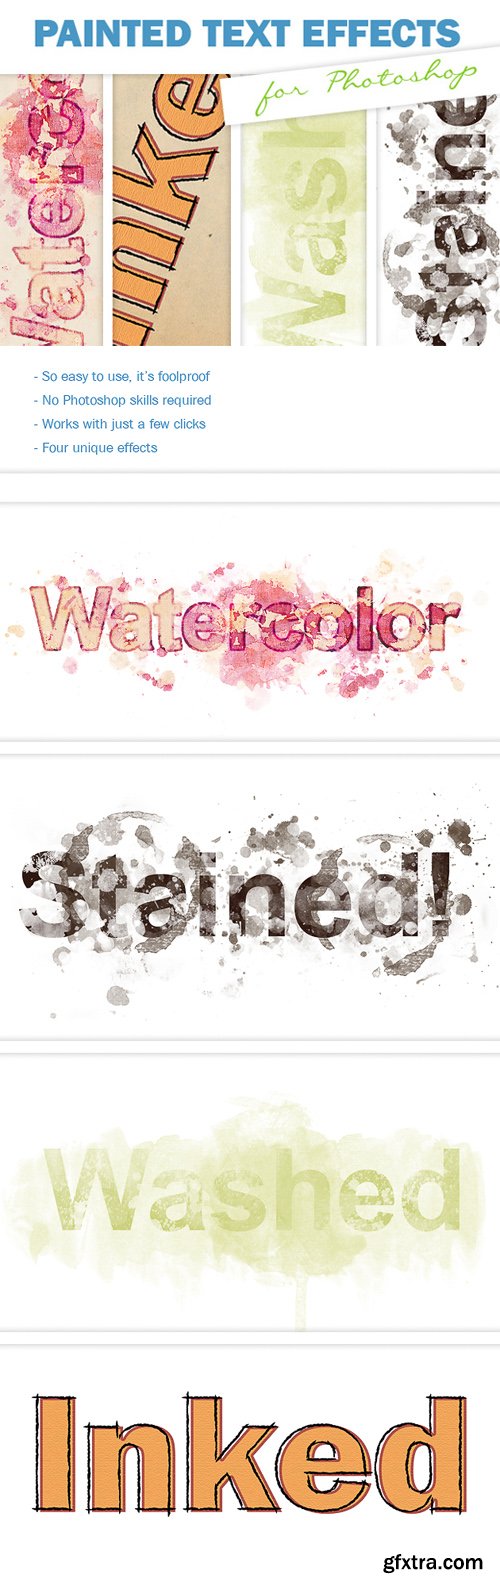 4 Easy to Use Painted Text Effects for Photoshop Worth $10 (Re-Up)